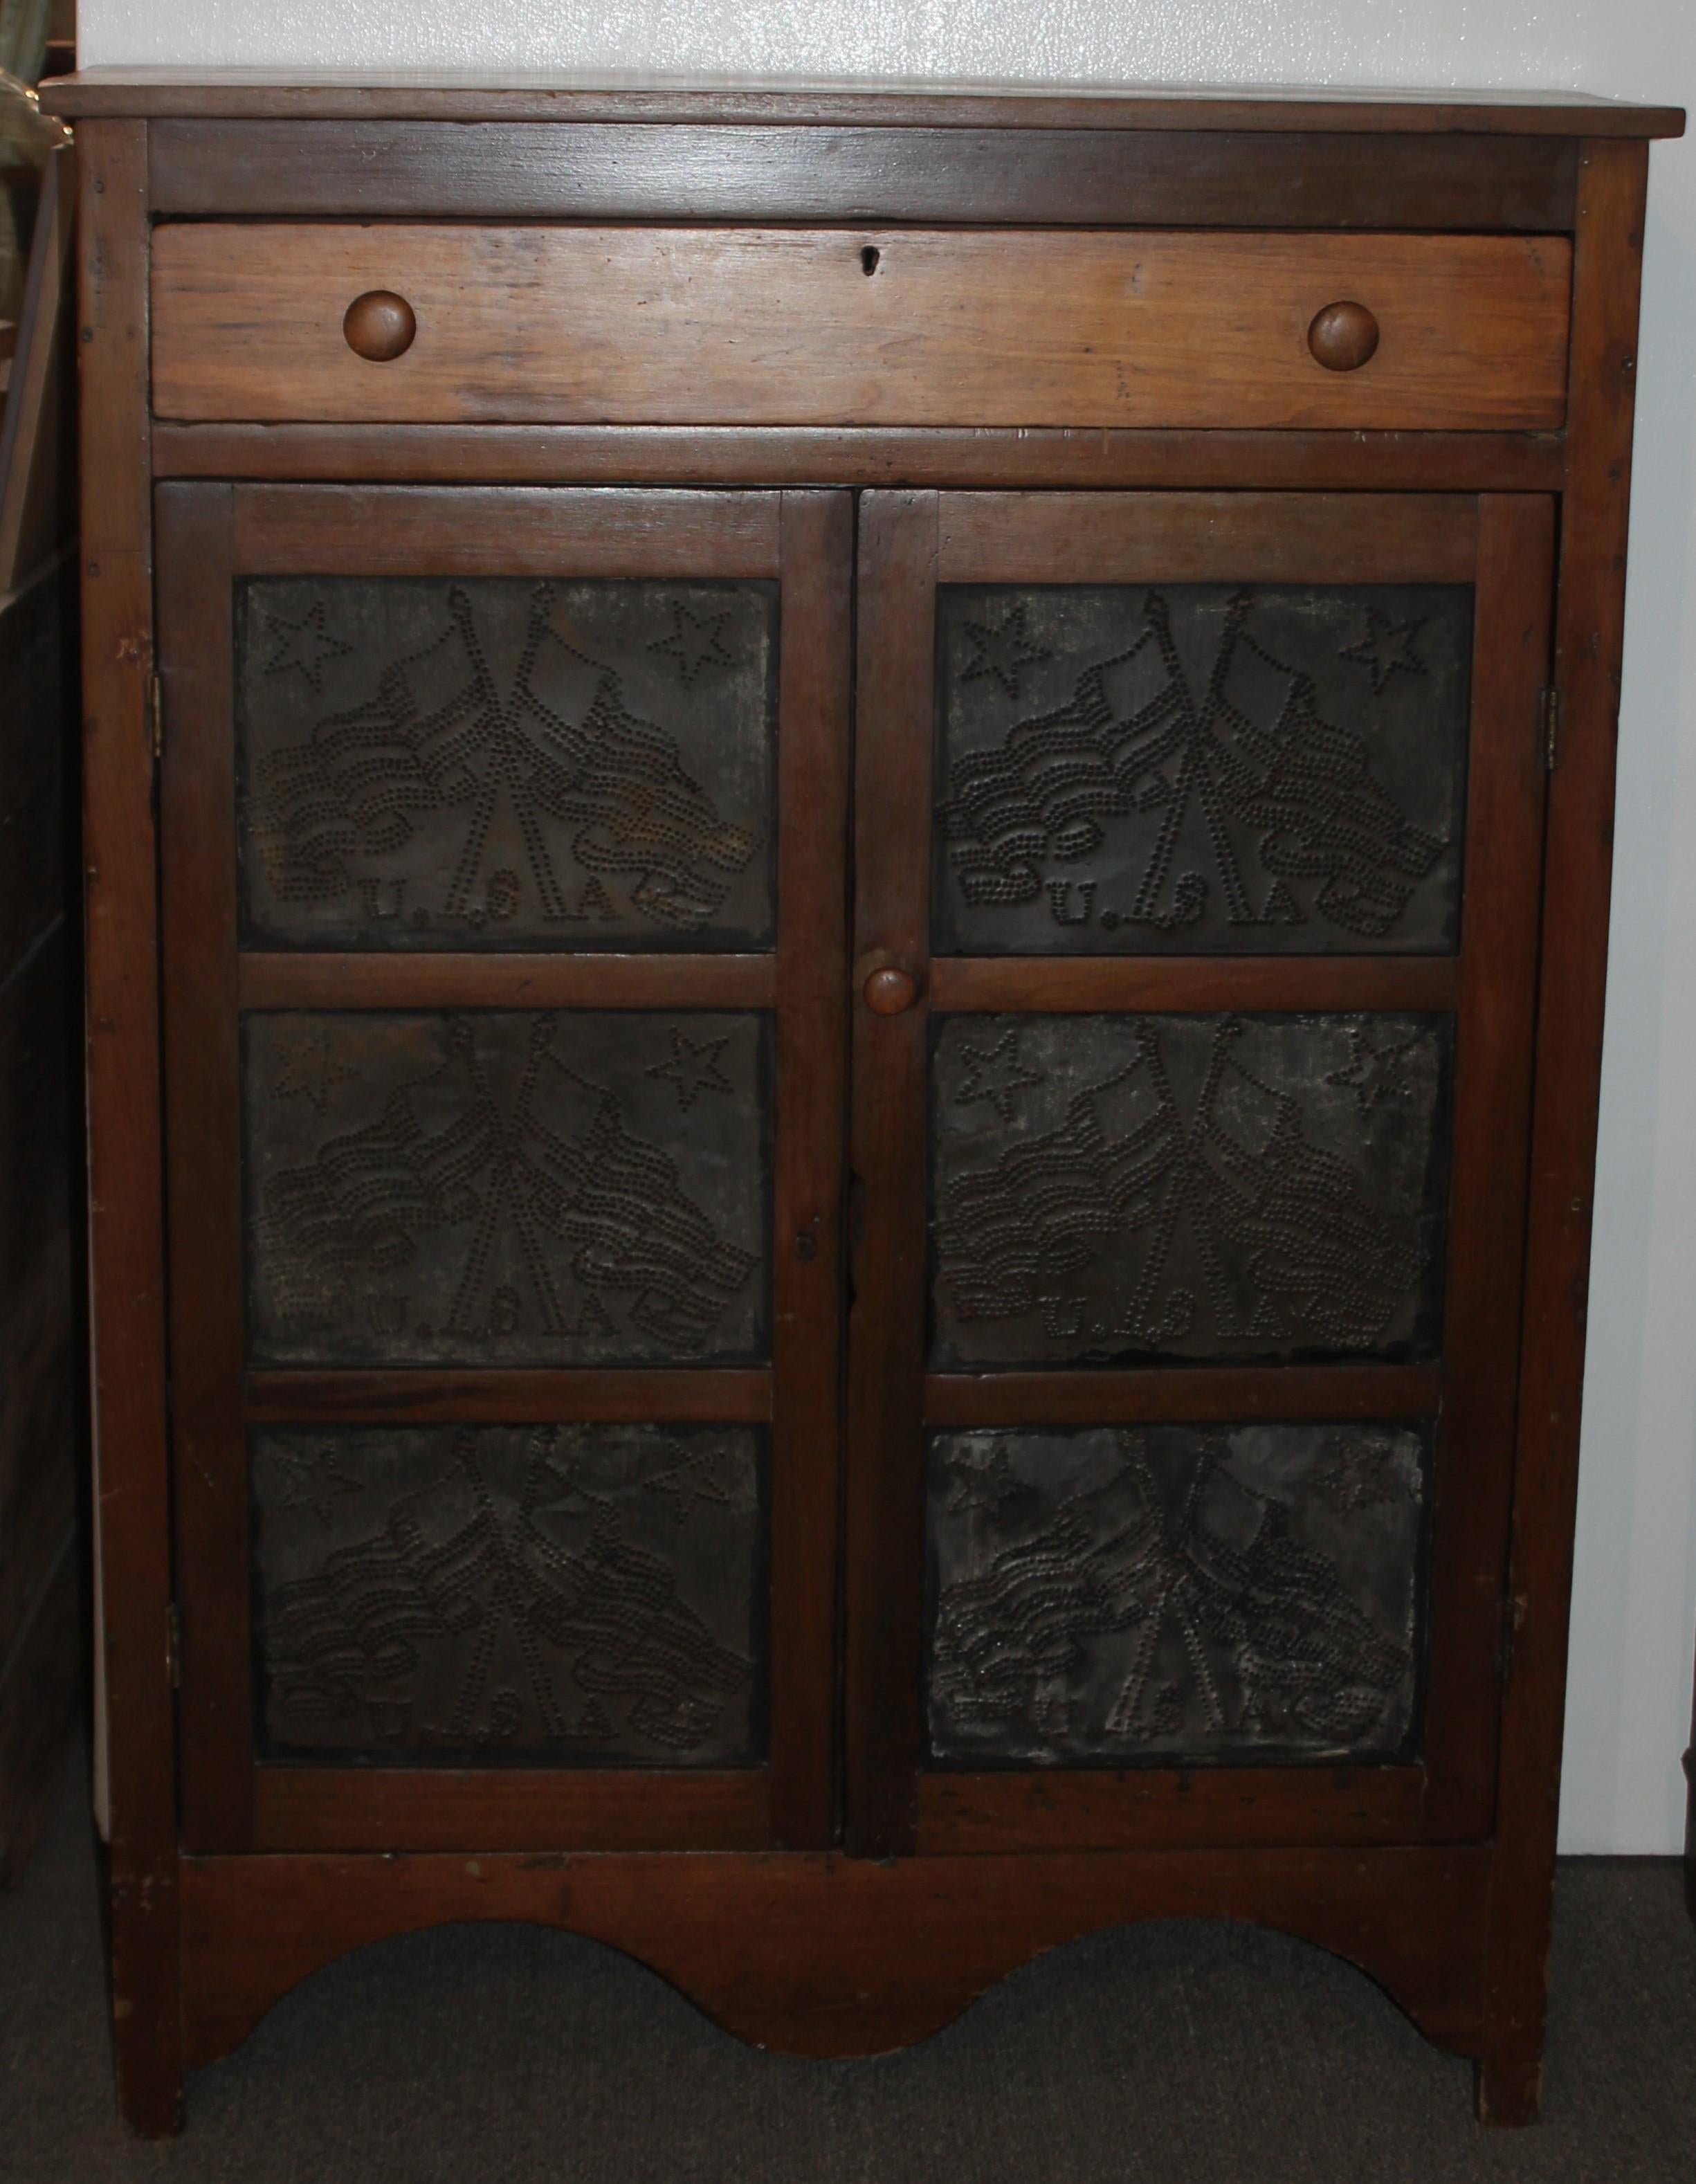 19thc Pie safe has punched in wholes on the tin that form crossed American Flags. Rare and unusual. Such a sight. All original and a natural old surface. This safe was found in East Tennessee and is in fine condition. The condition is very good and